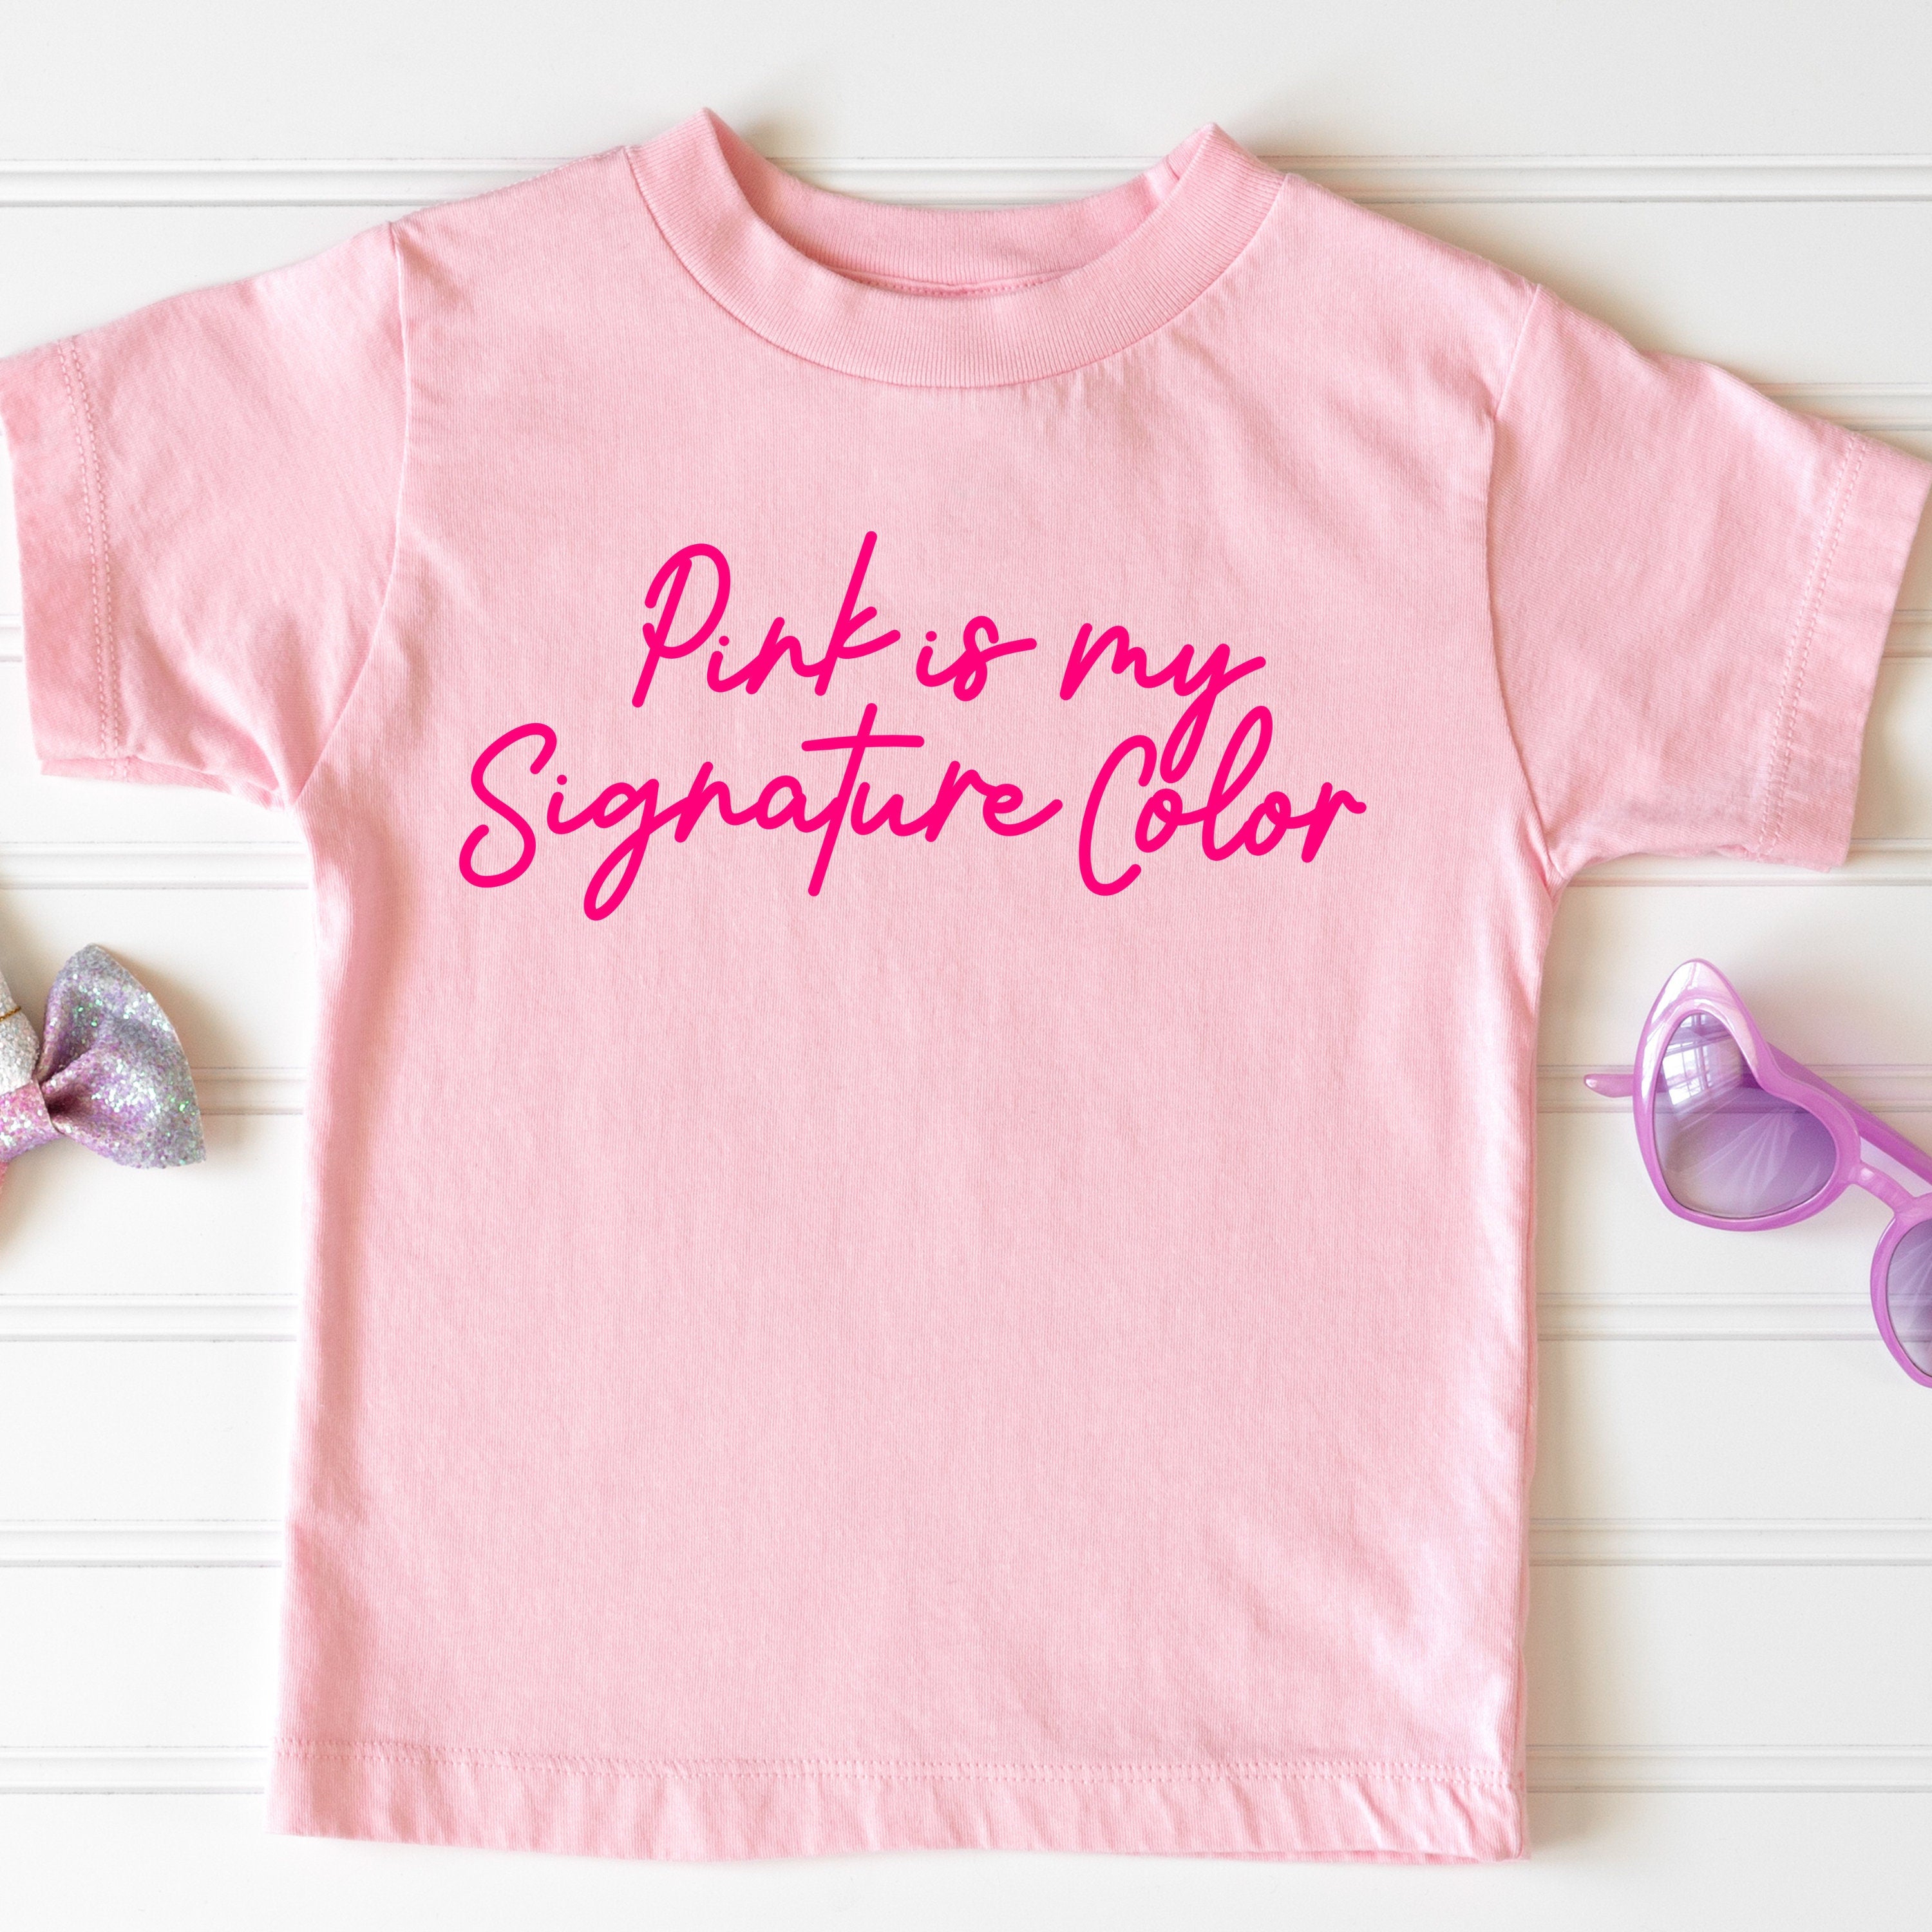 Pink is my Signature Color Kids T-Shirt, Steel Magnolias Quote Shirt, Steel Magnolias gift